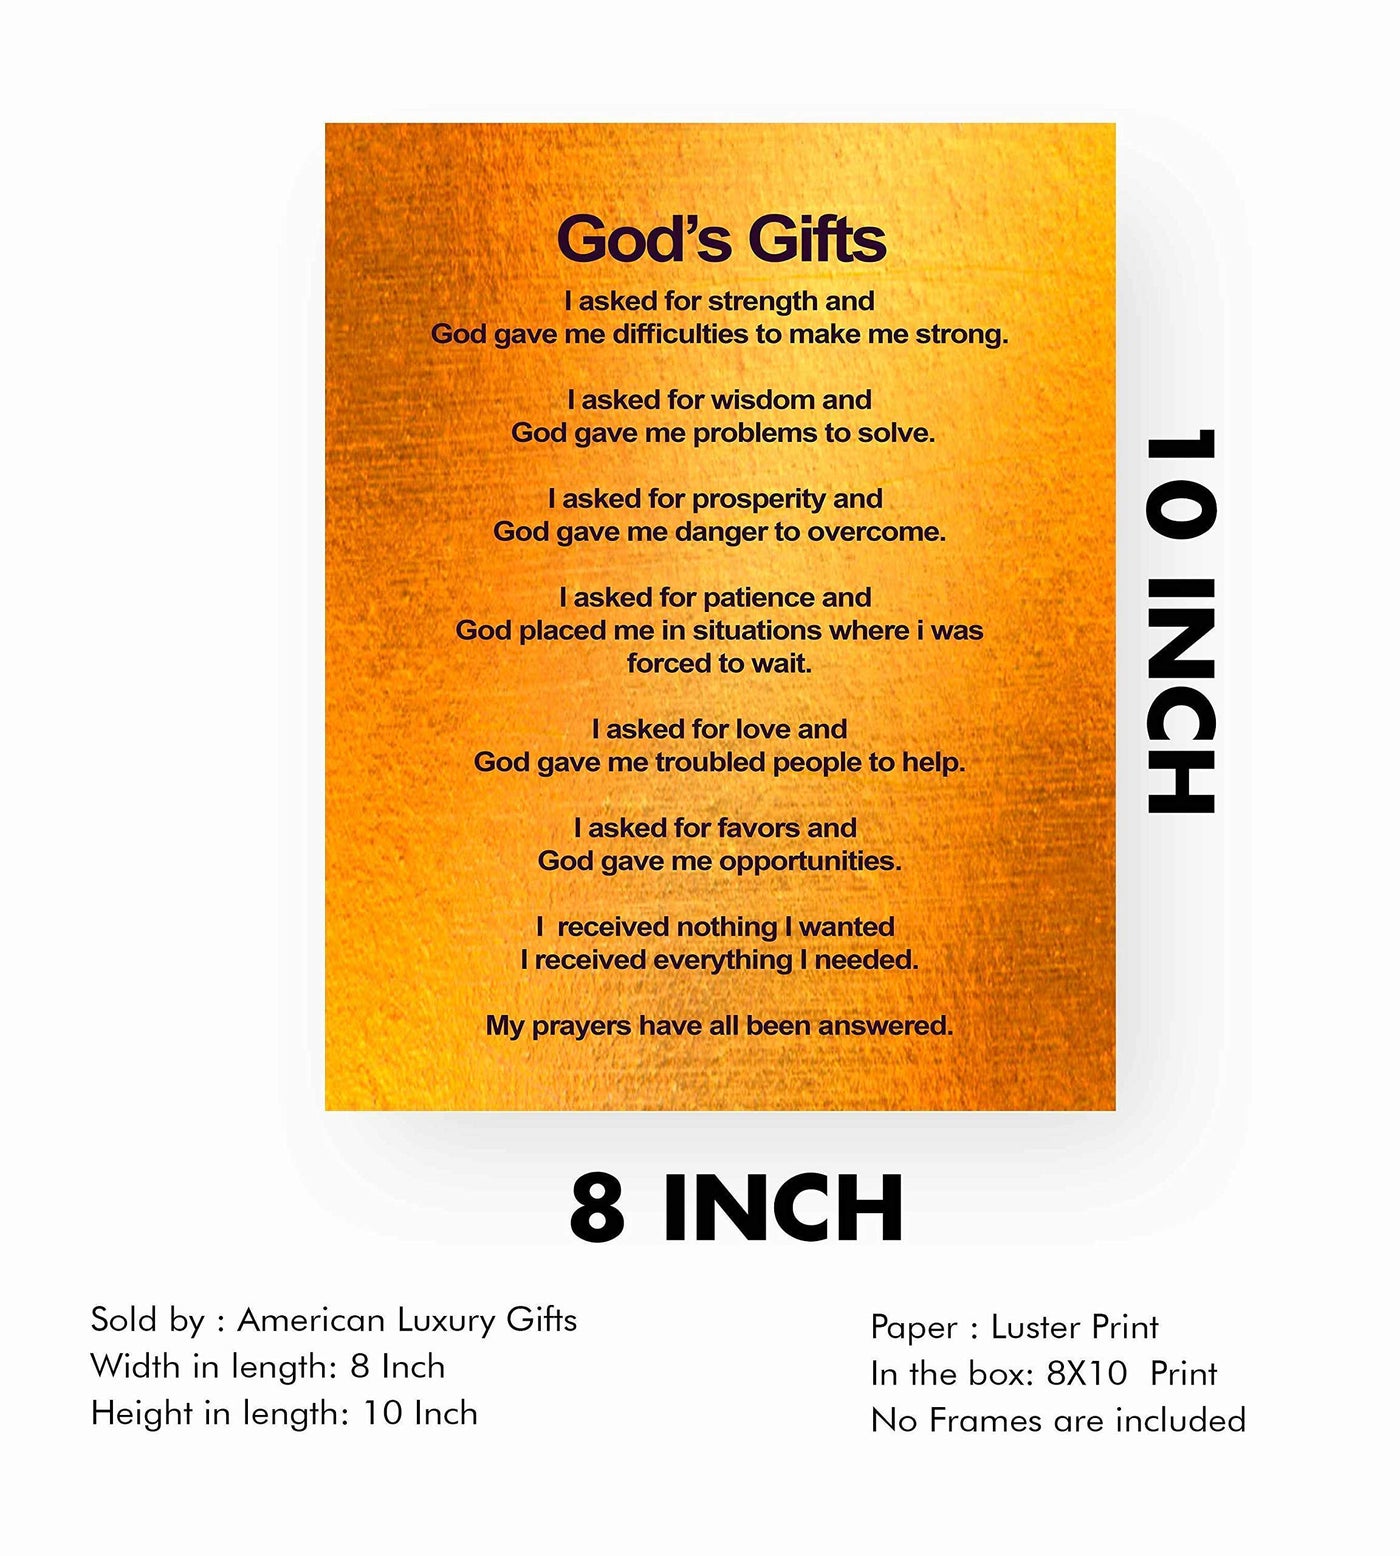 God's Gifts-Prayers Have All Been Answered-Spiritual Wall Art-8 x 10" Vintage Religious Poster Print-Ready to Frame. Inspirational Home-Office-Church D?cor. Great Christian Reminder of God's Grace!